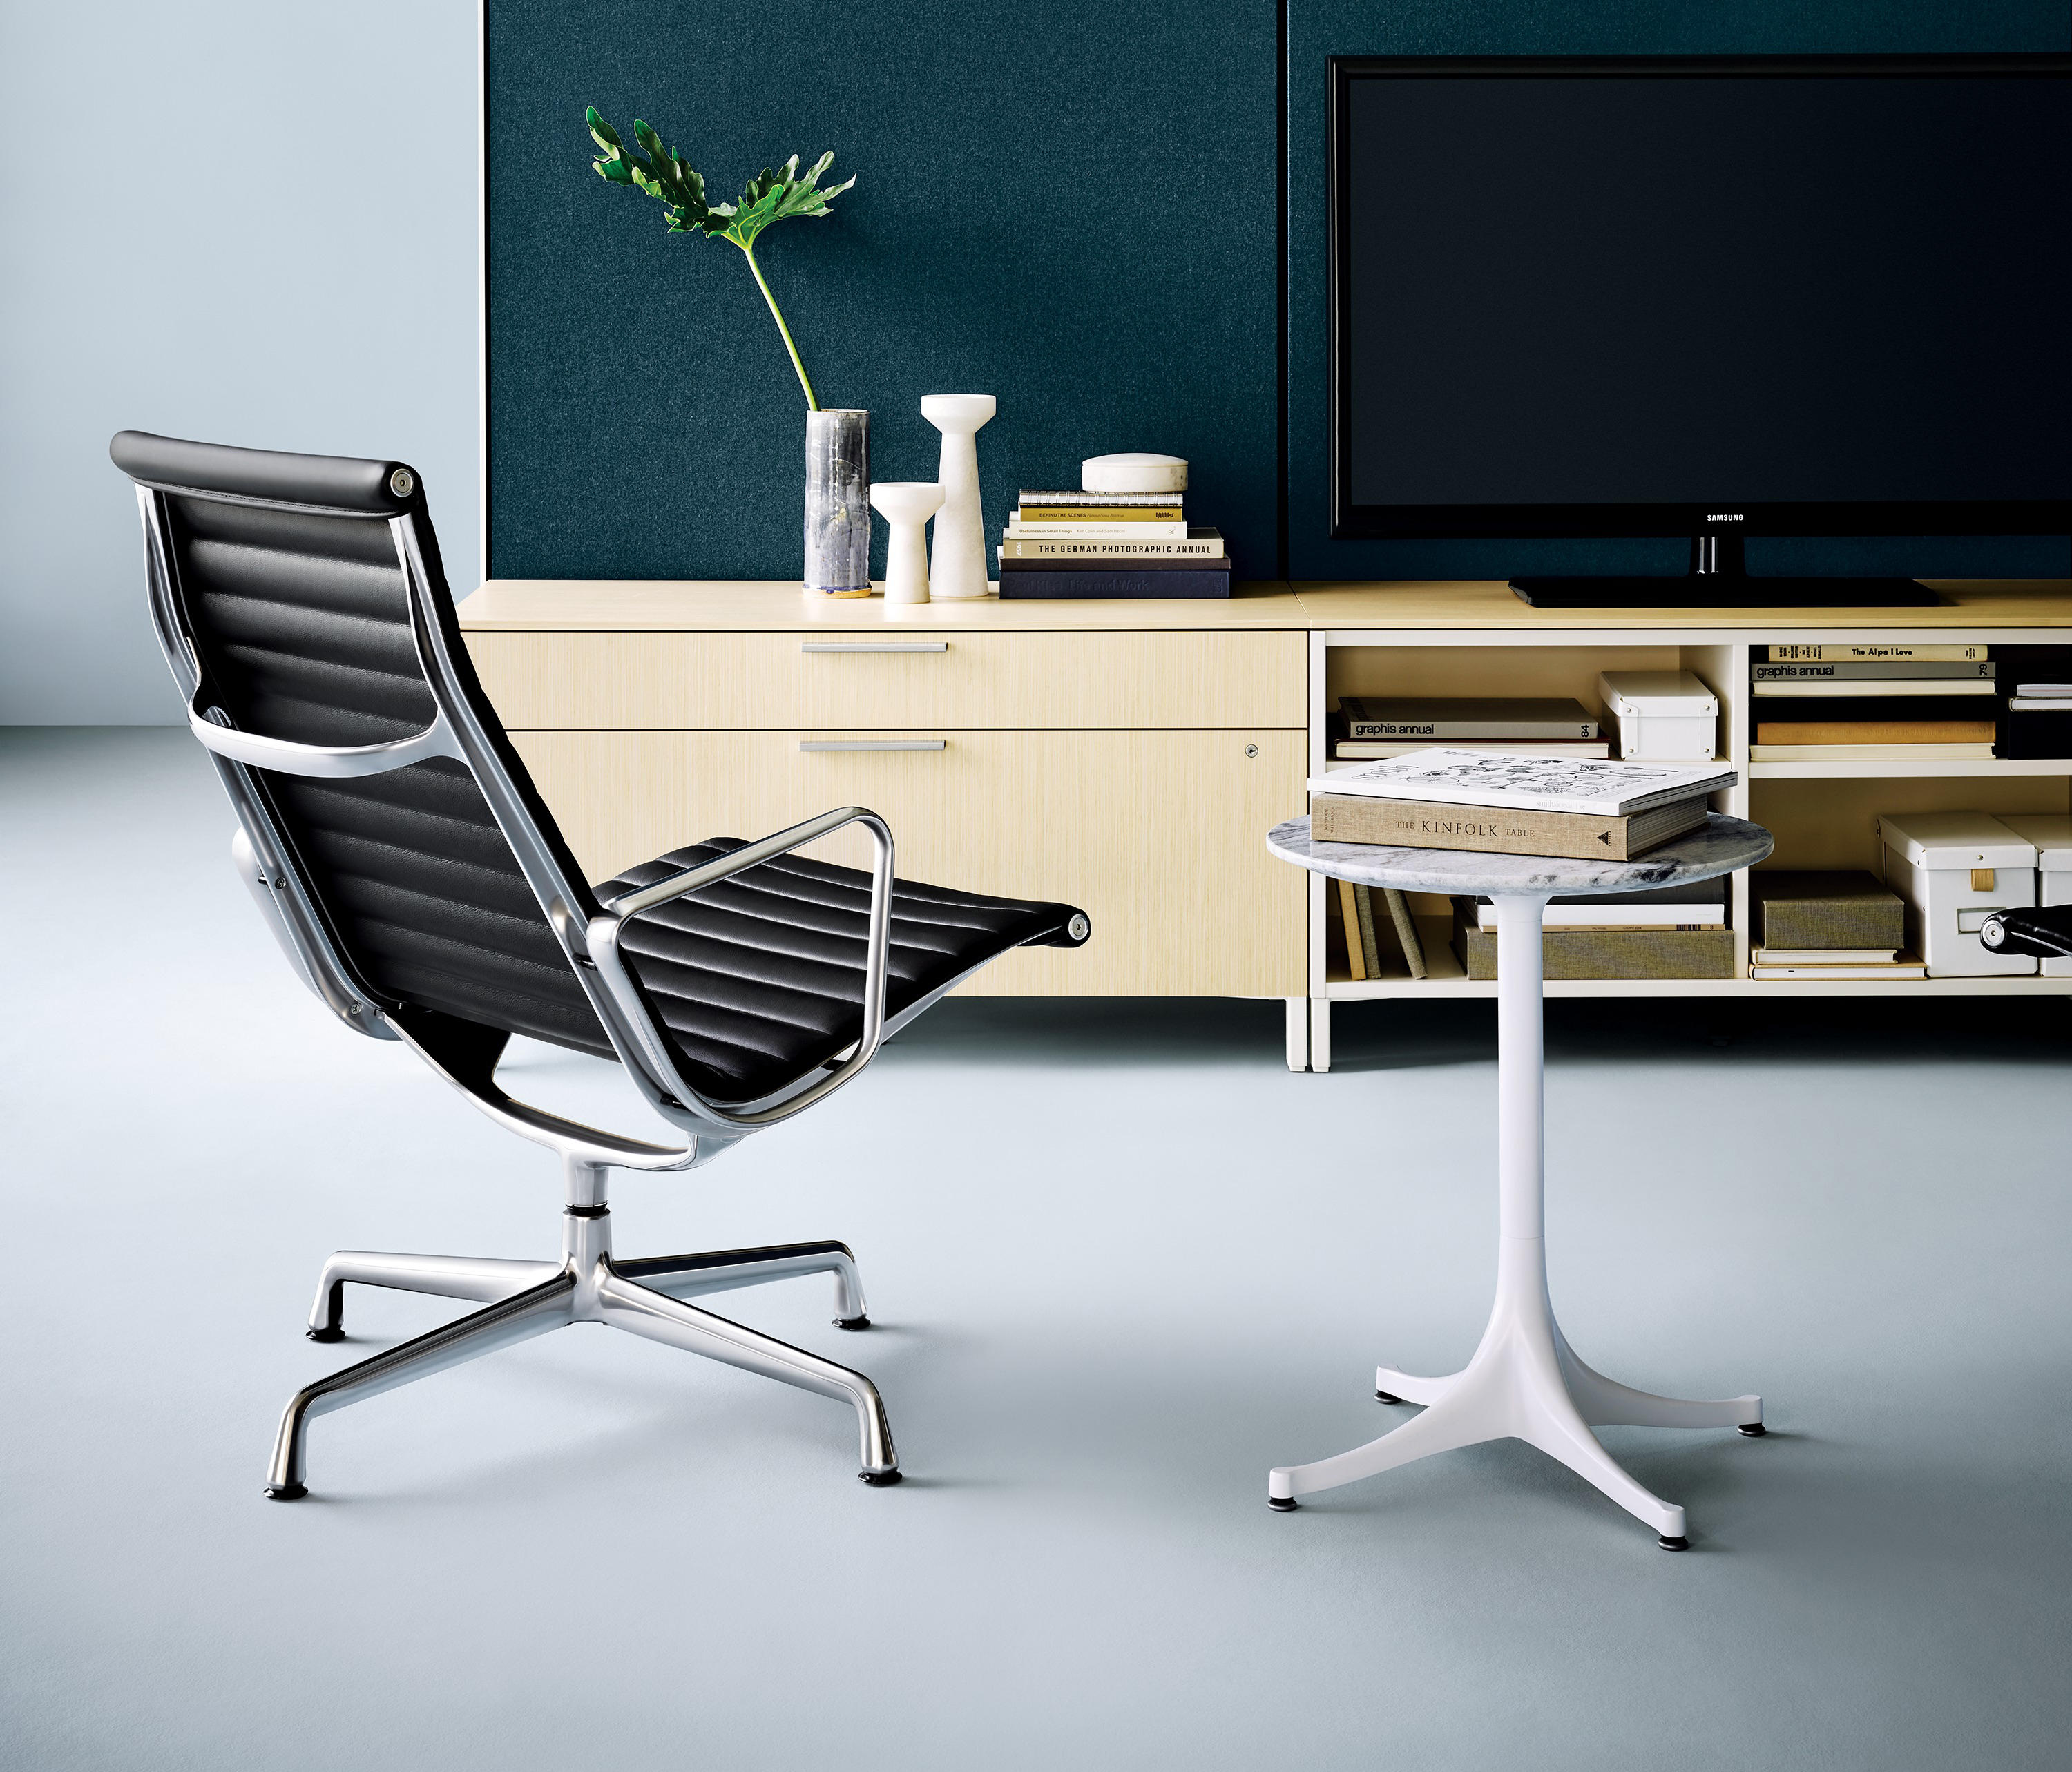 Eames Aluminum Group Executive Chair | Architonic